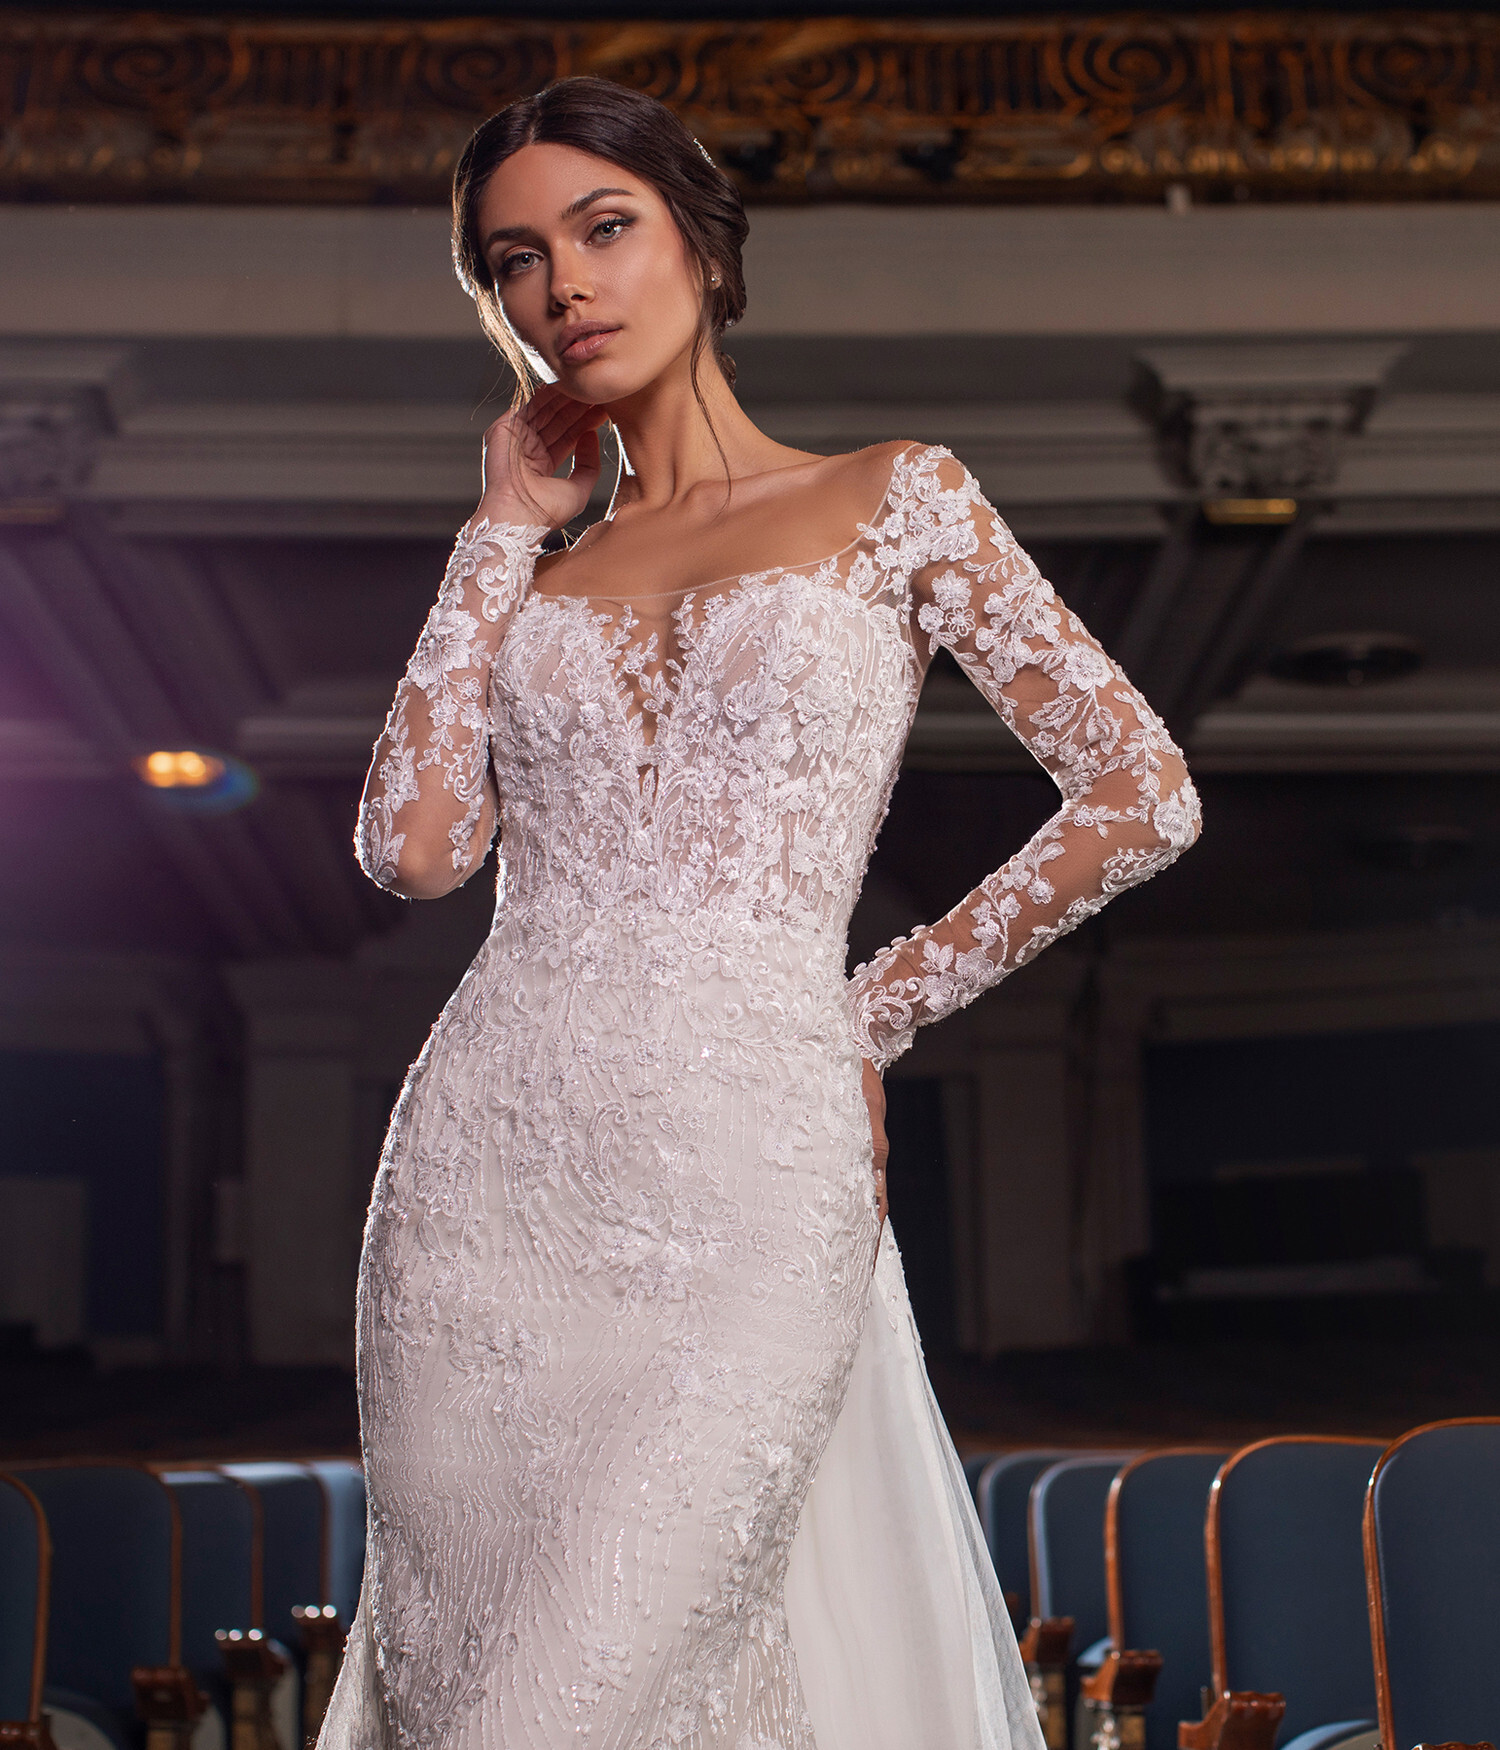 RALSTON Wedding Dress from Pronovias - hitched.co.uk